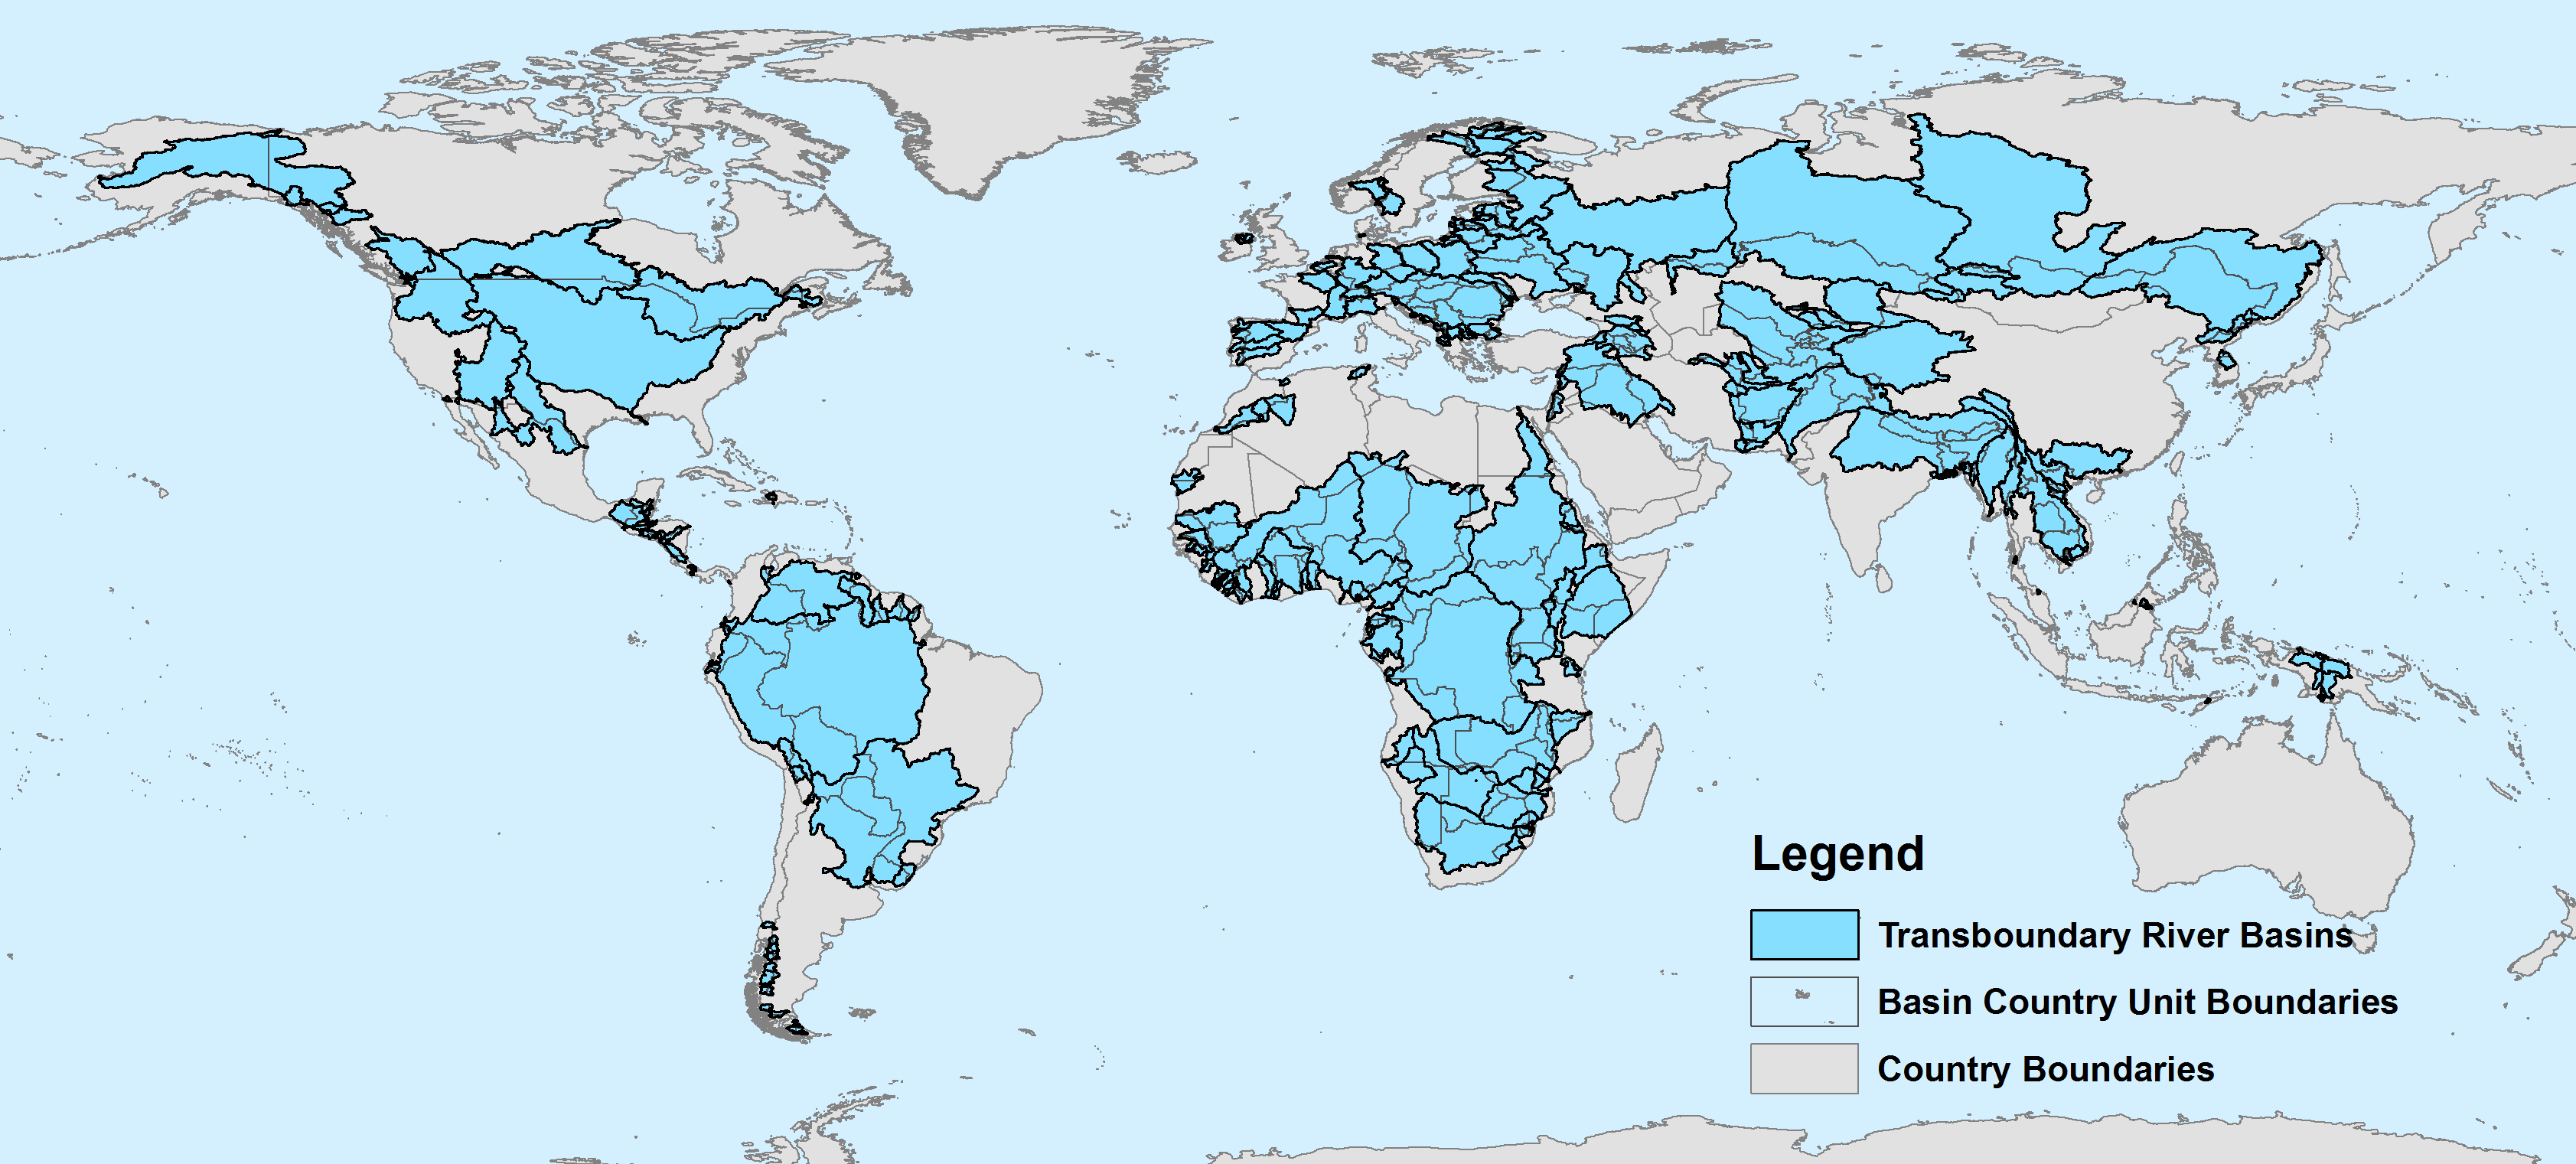 Map of the world's transboundary river basins.  Image from: http://twap-rivers.org/#global-basins, last accessed 7/14/17.